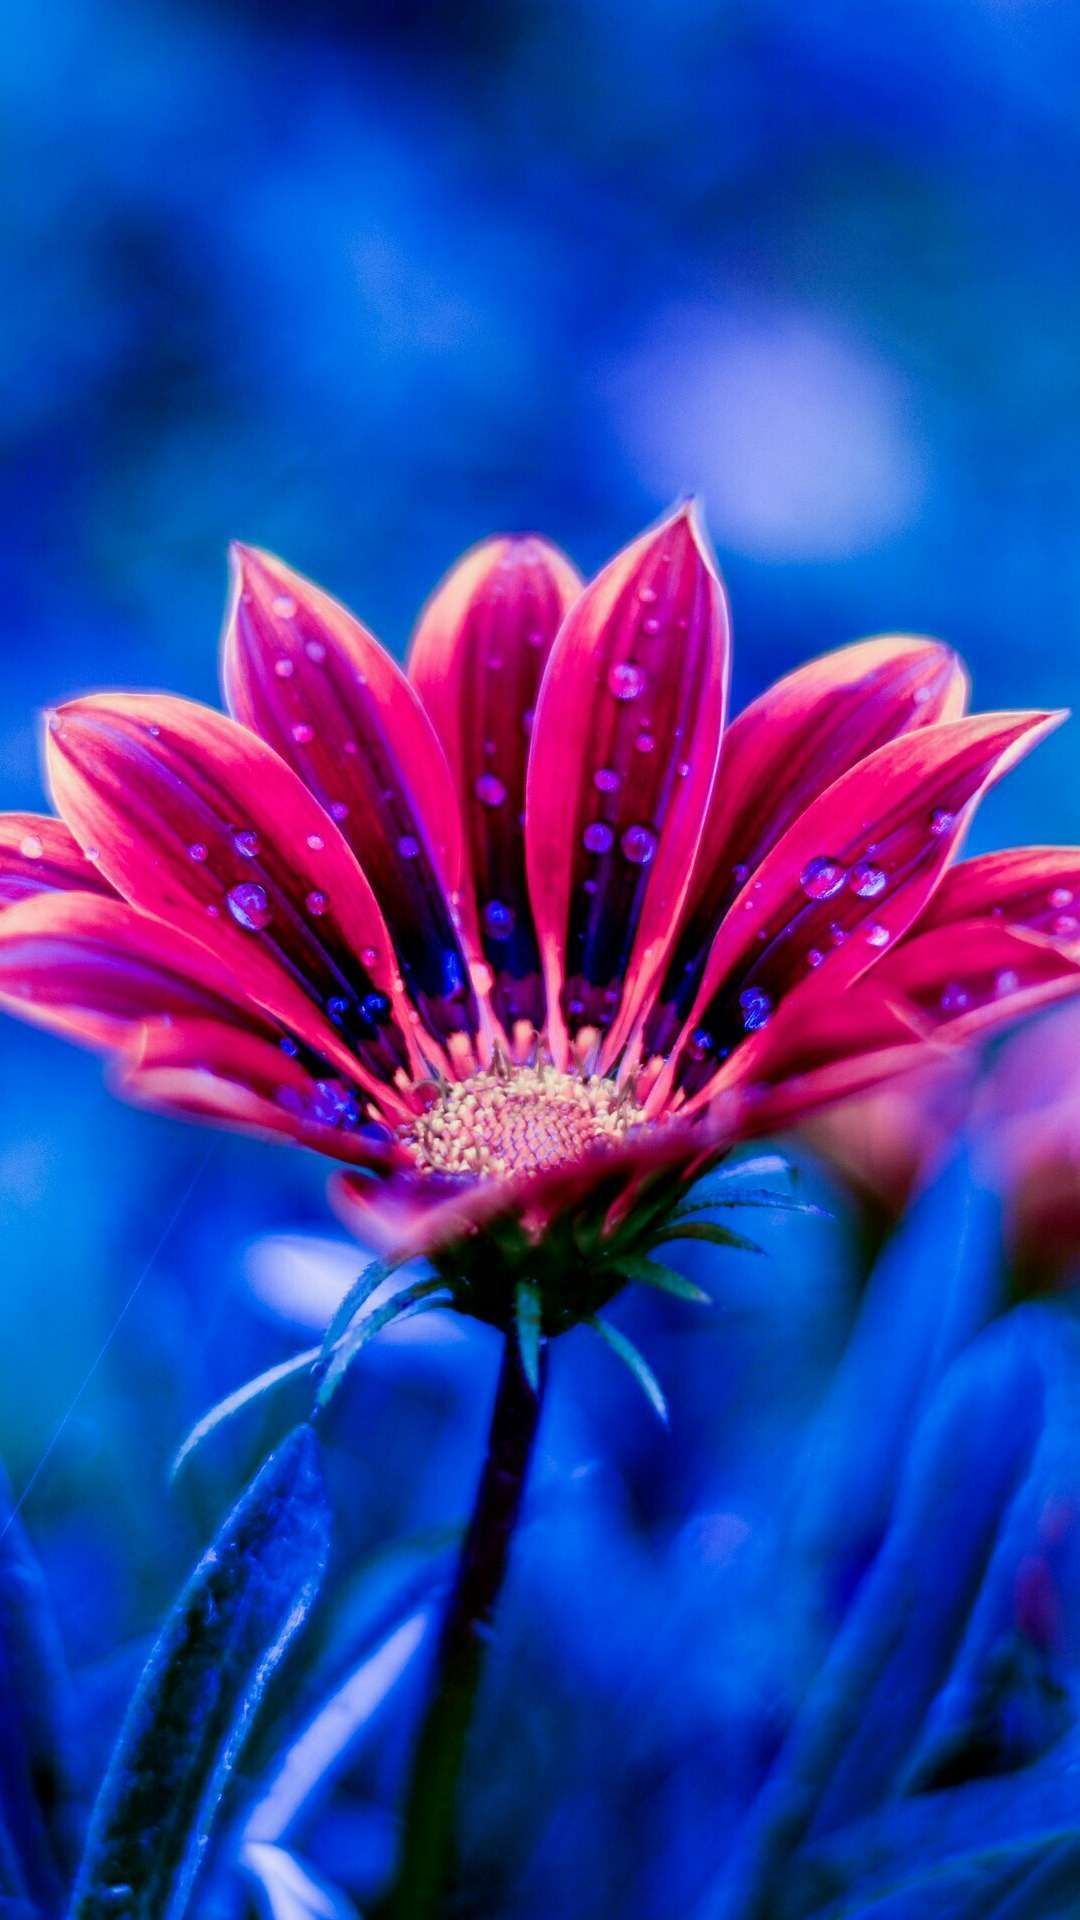 Amoled Flower HD Android Wallpapers - Wallpaper Cave